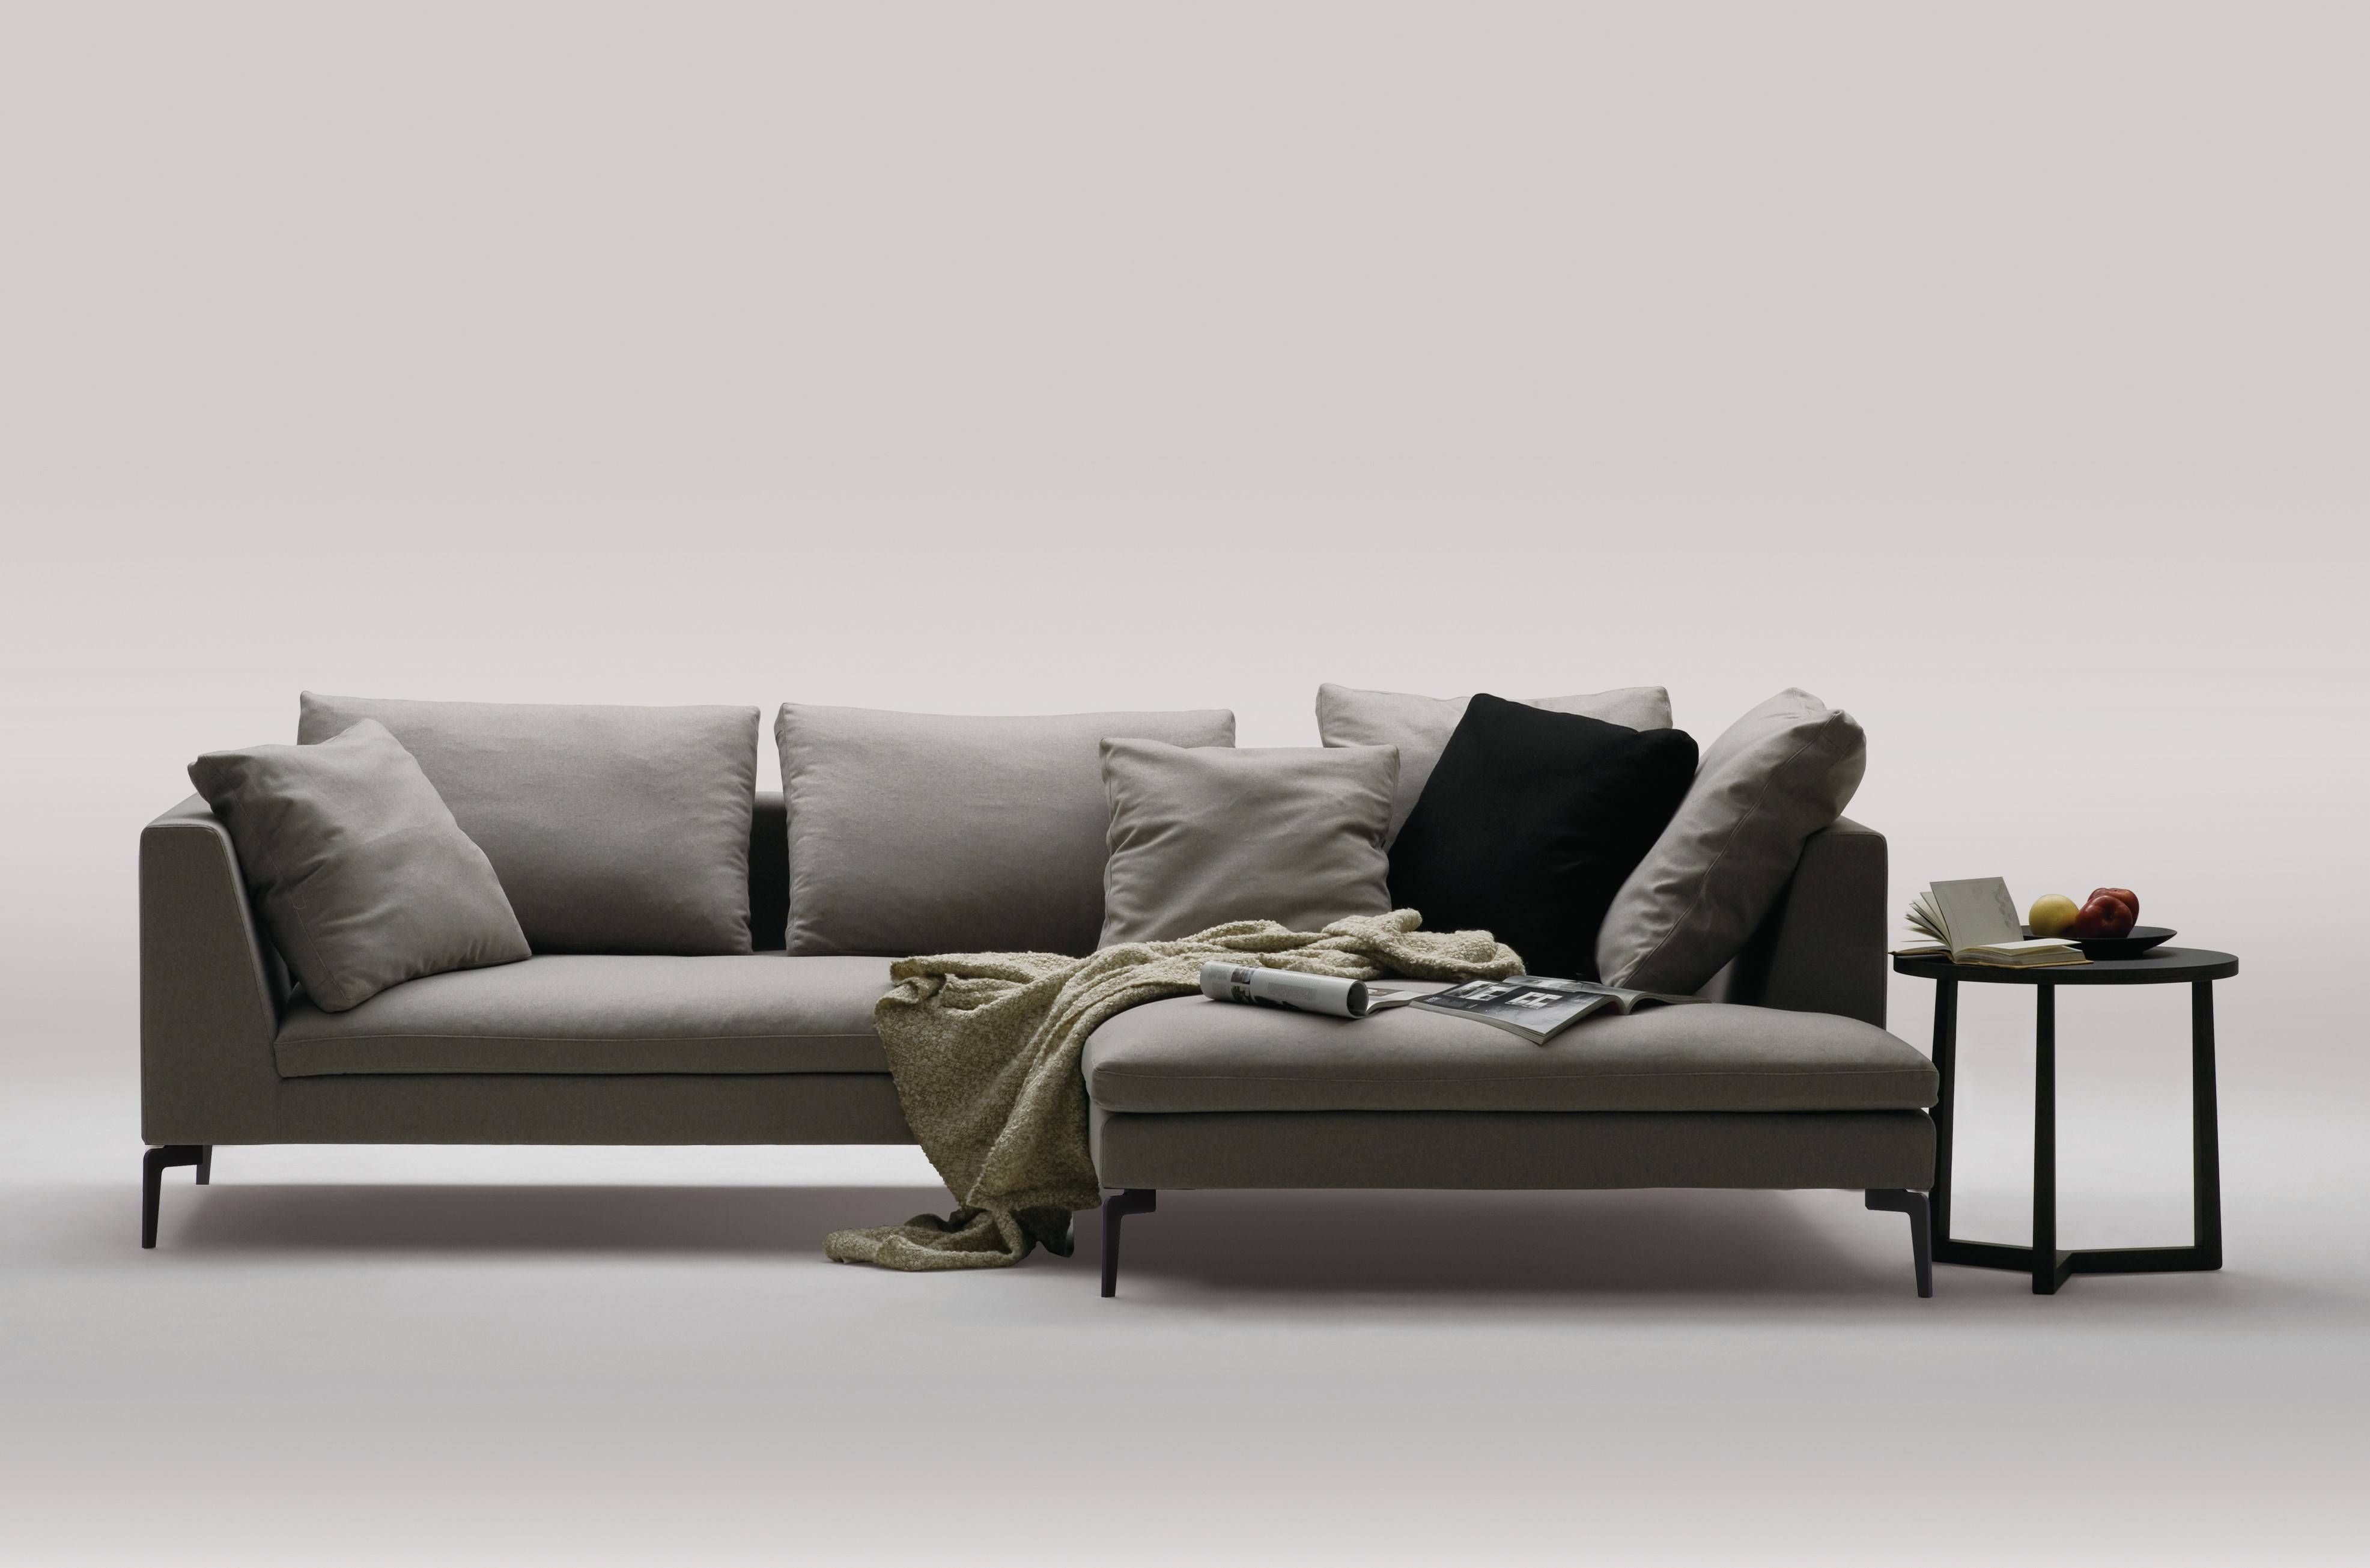 Camerich Hits The Big Screens With Ex Machina – Modern Designer Intended For Camerich Sofas (View 3 of 15)